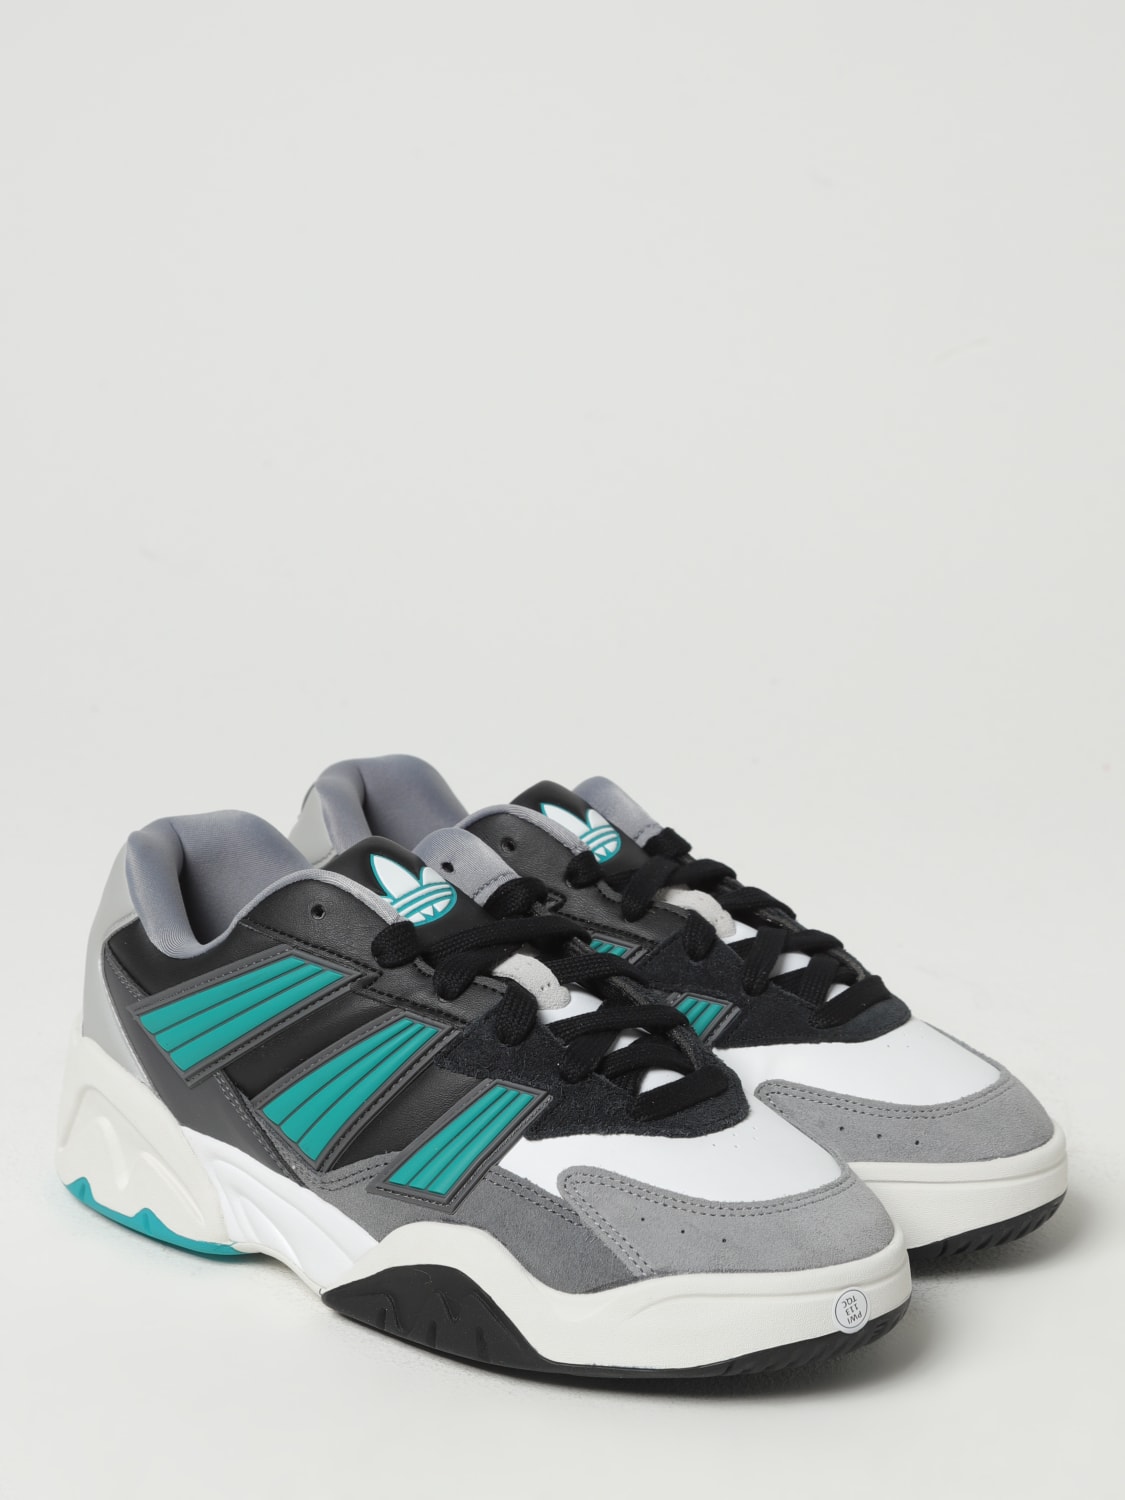 Grey sneakers Originals in rubber - Magnetic Adidas at IF5378 online leather ORIGINALS: | ADIDAS sneakers and Court